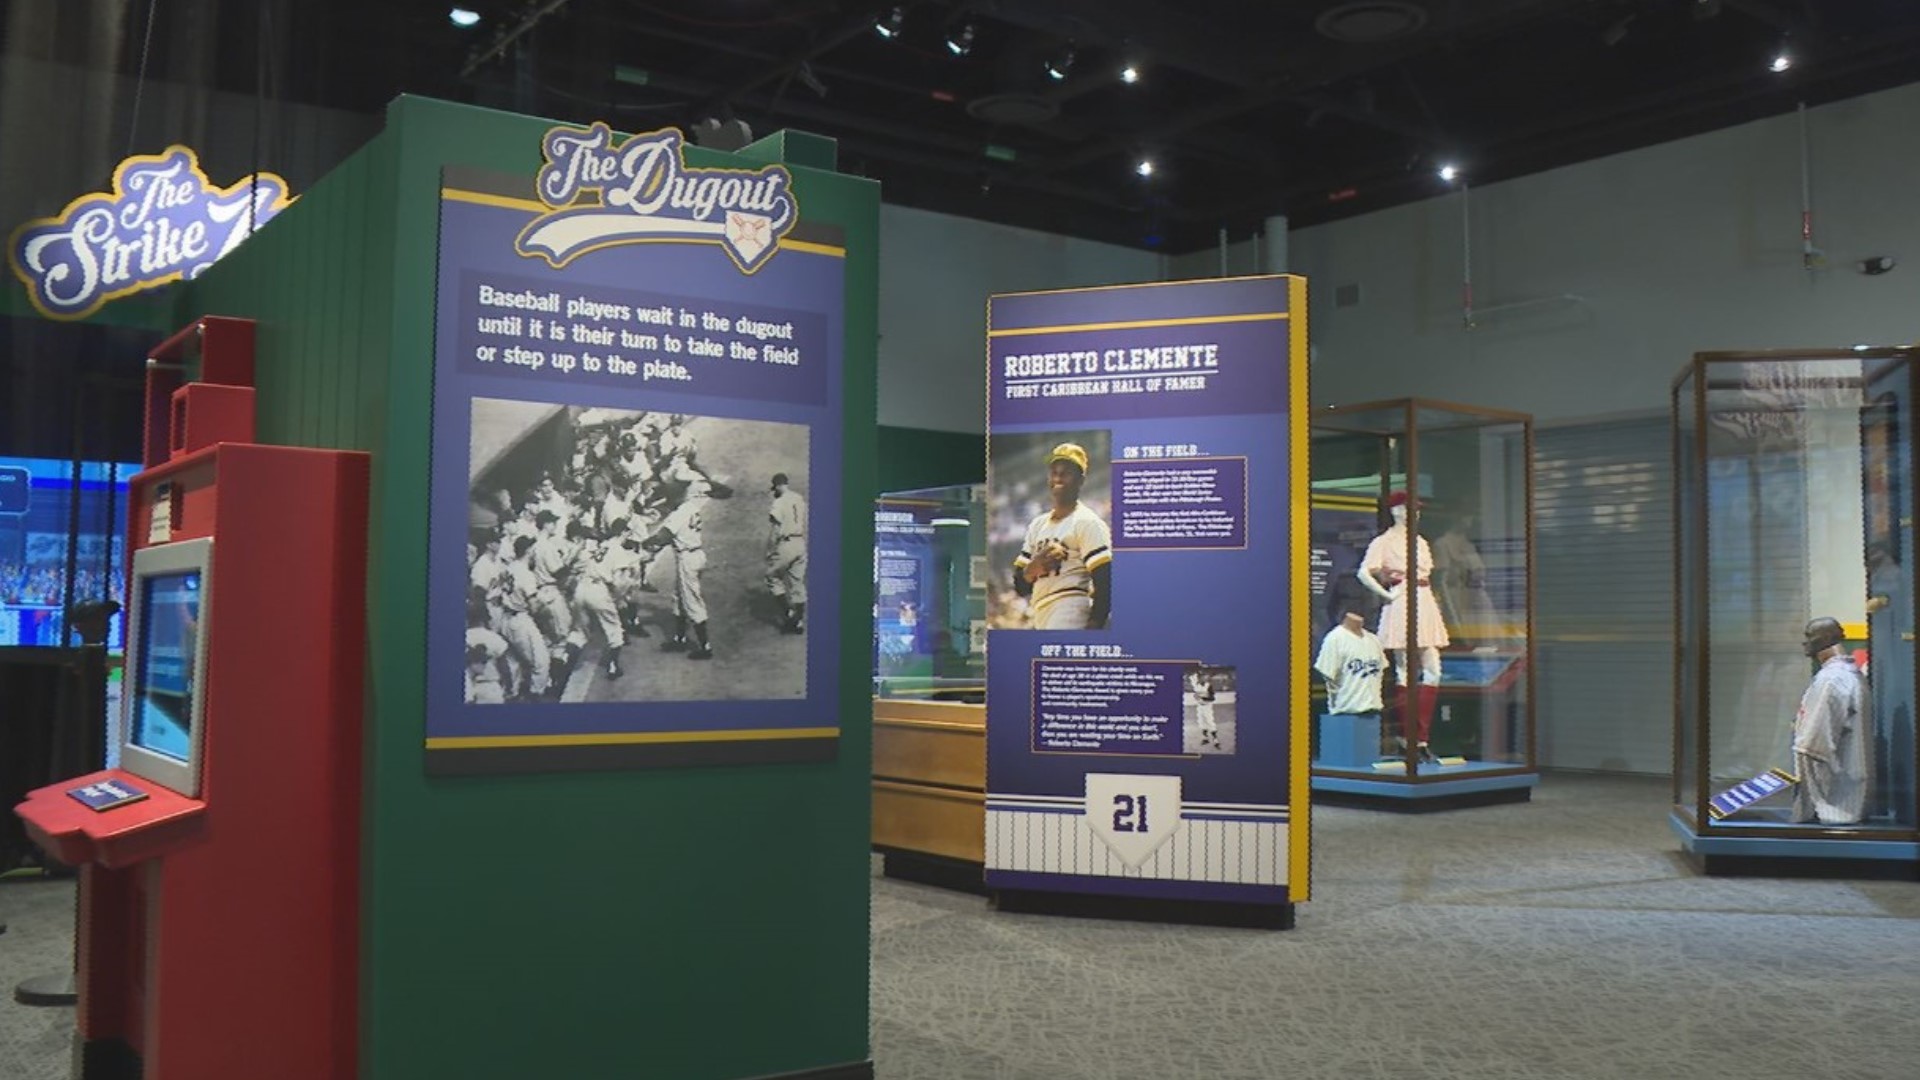 "Baseball Boundary Breakers" highlights anyone who brought something different while facing adversity, challenges and stereotypes to play the game they loved.